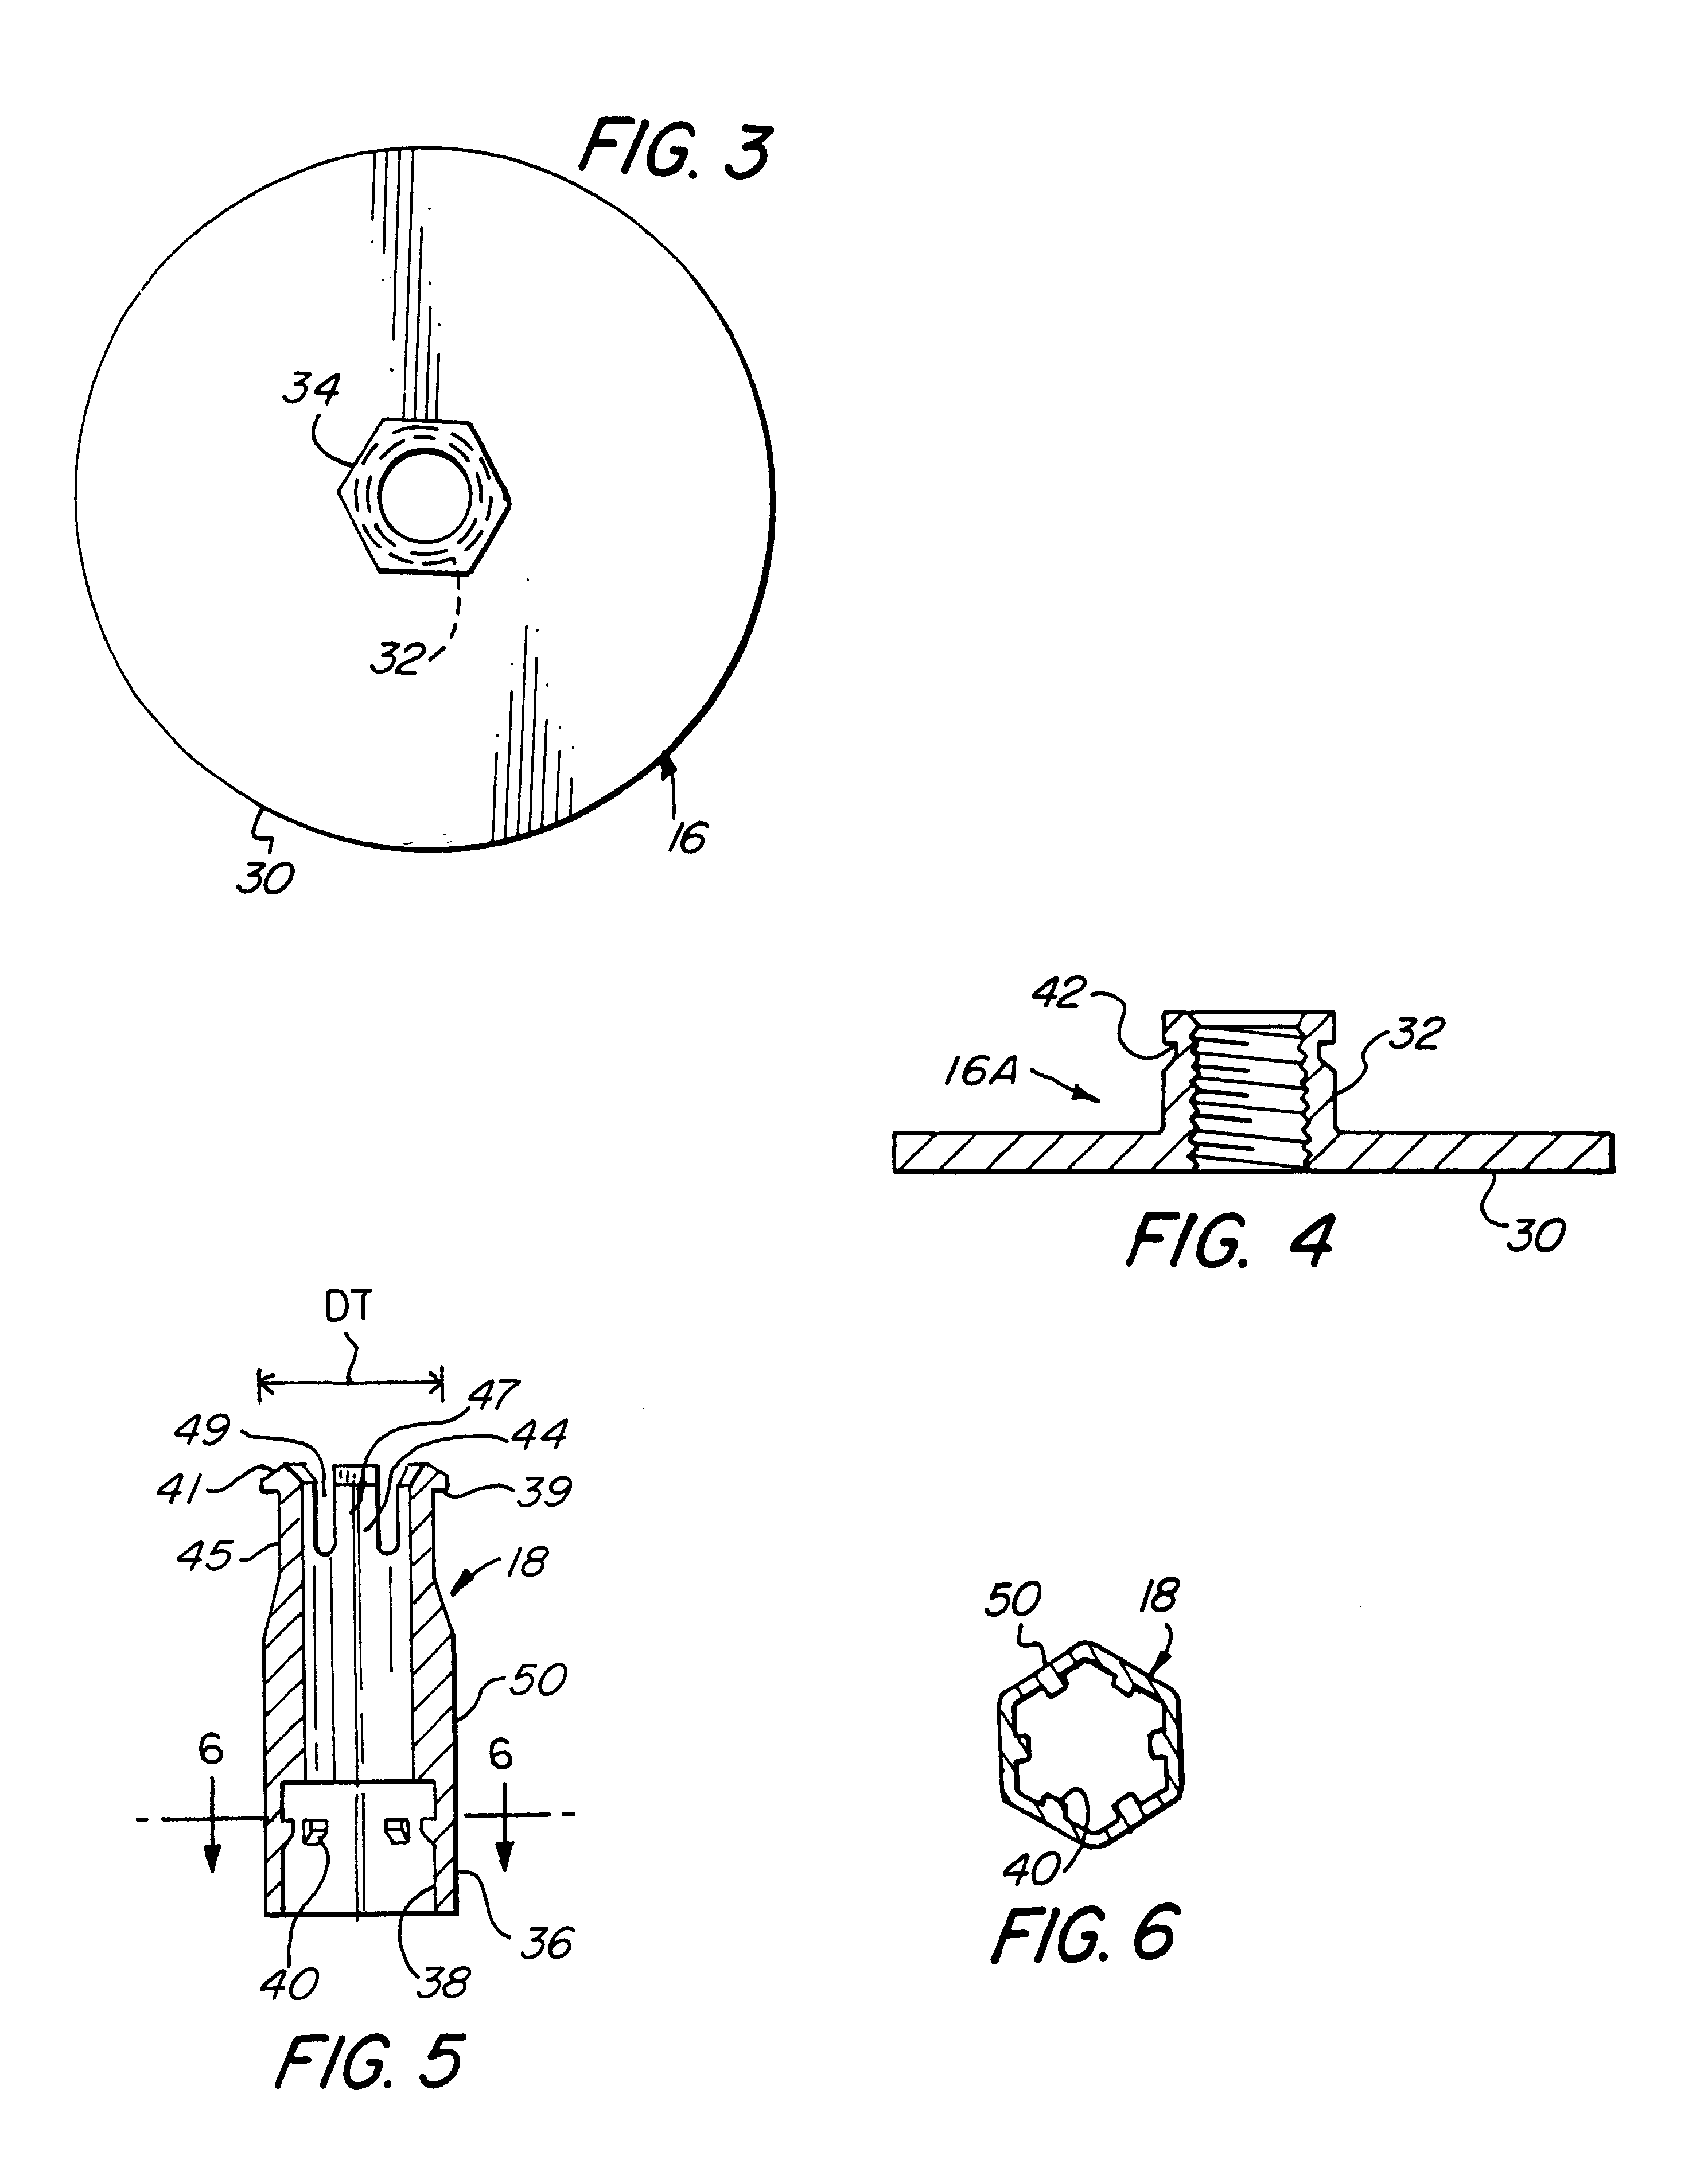 Shock mount assembly with polymeric thimble tube